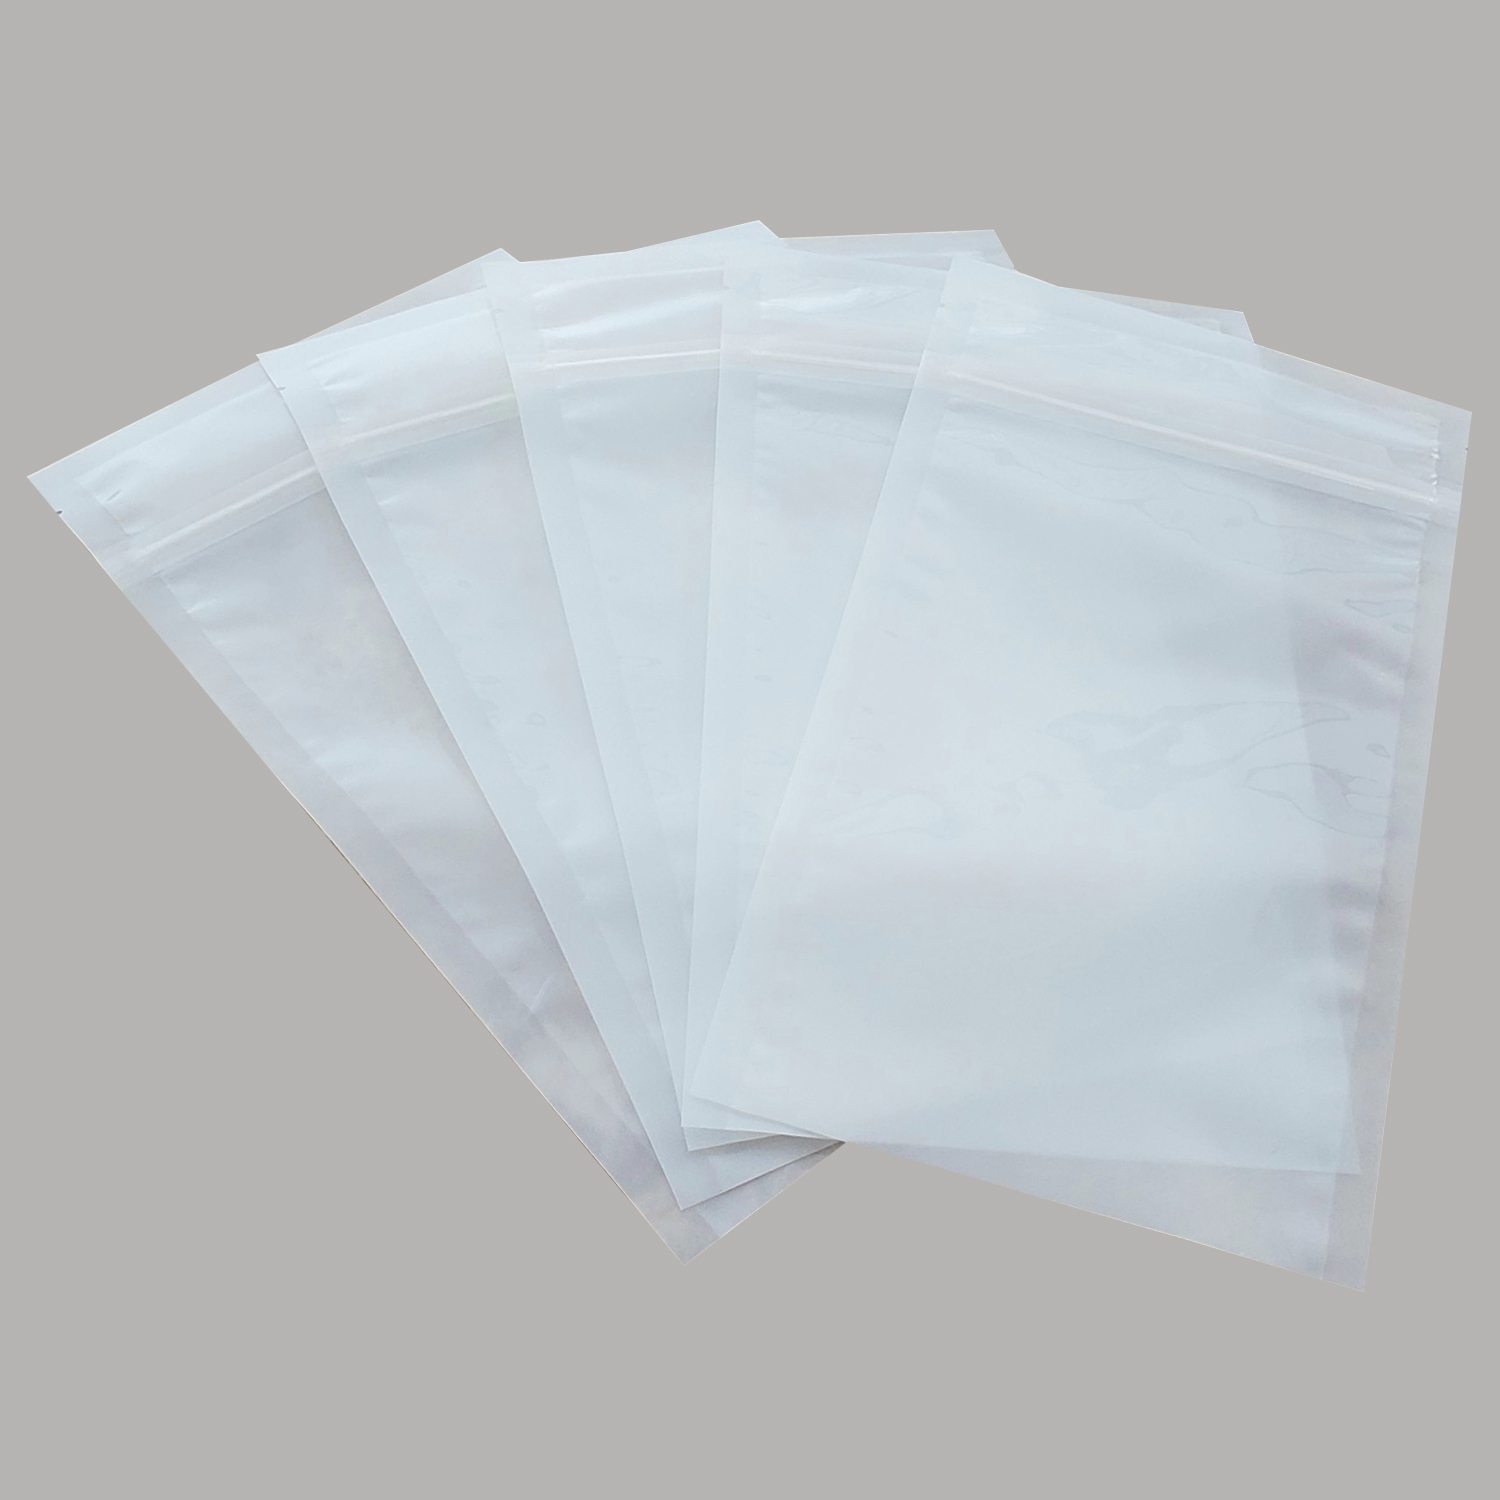 100% Bio-degradable Open and Close BAG/Pouch